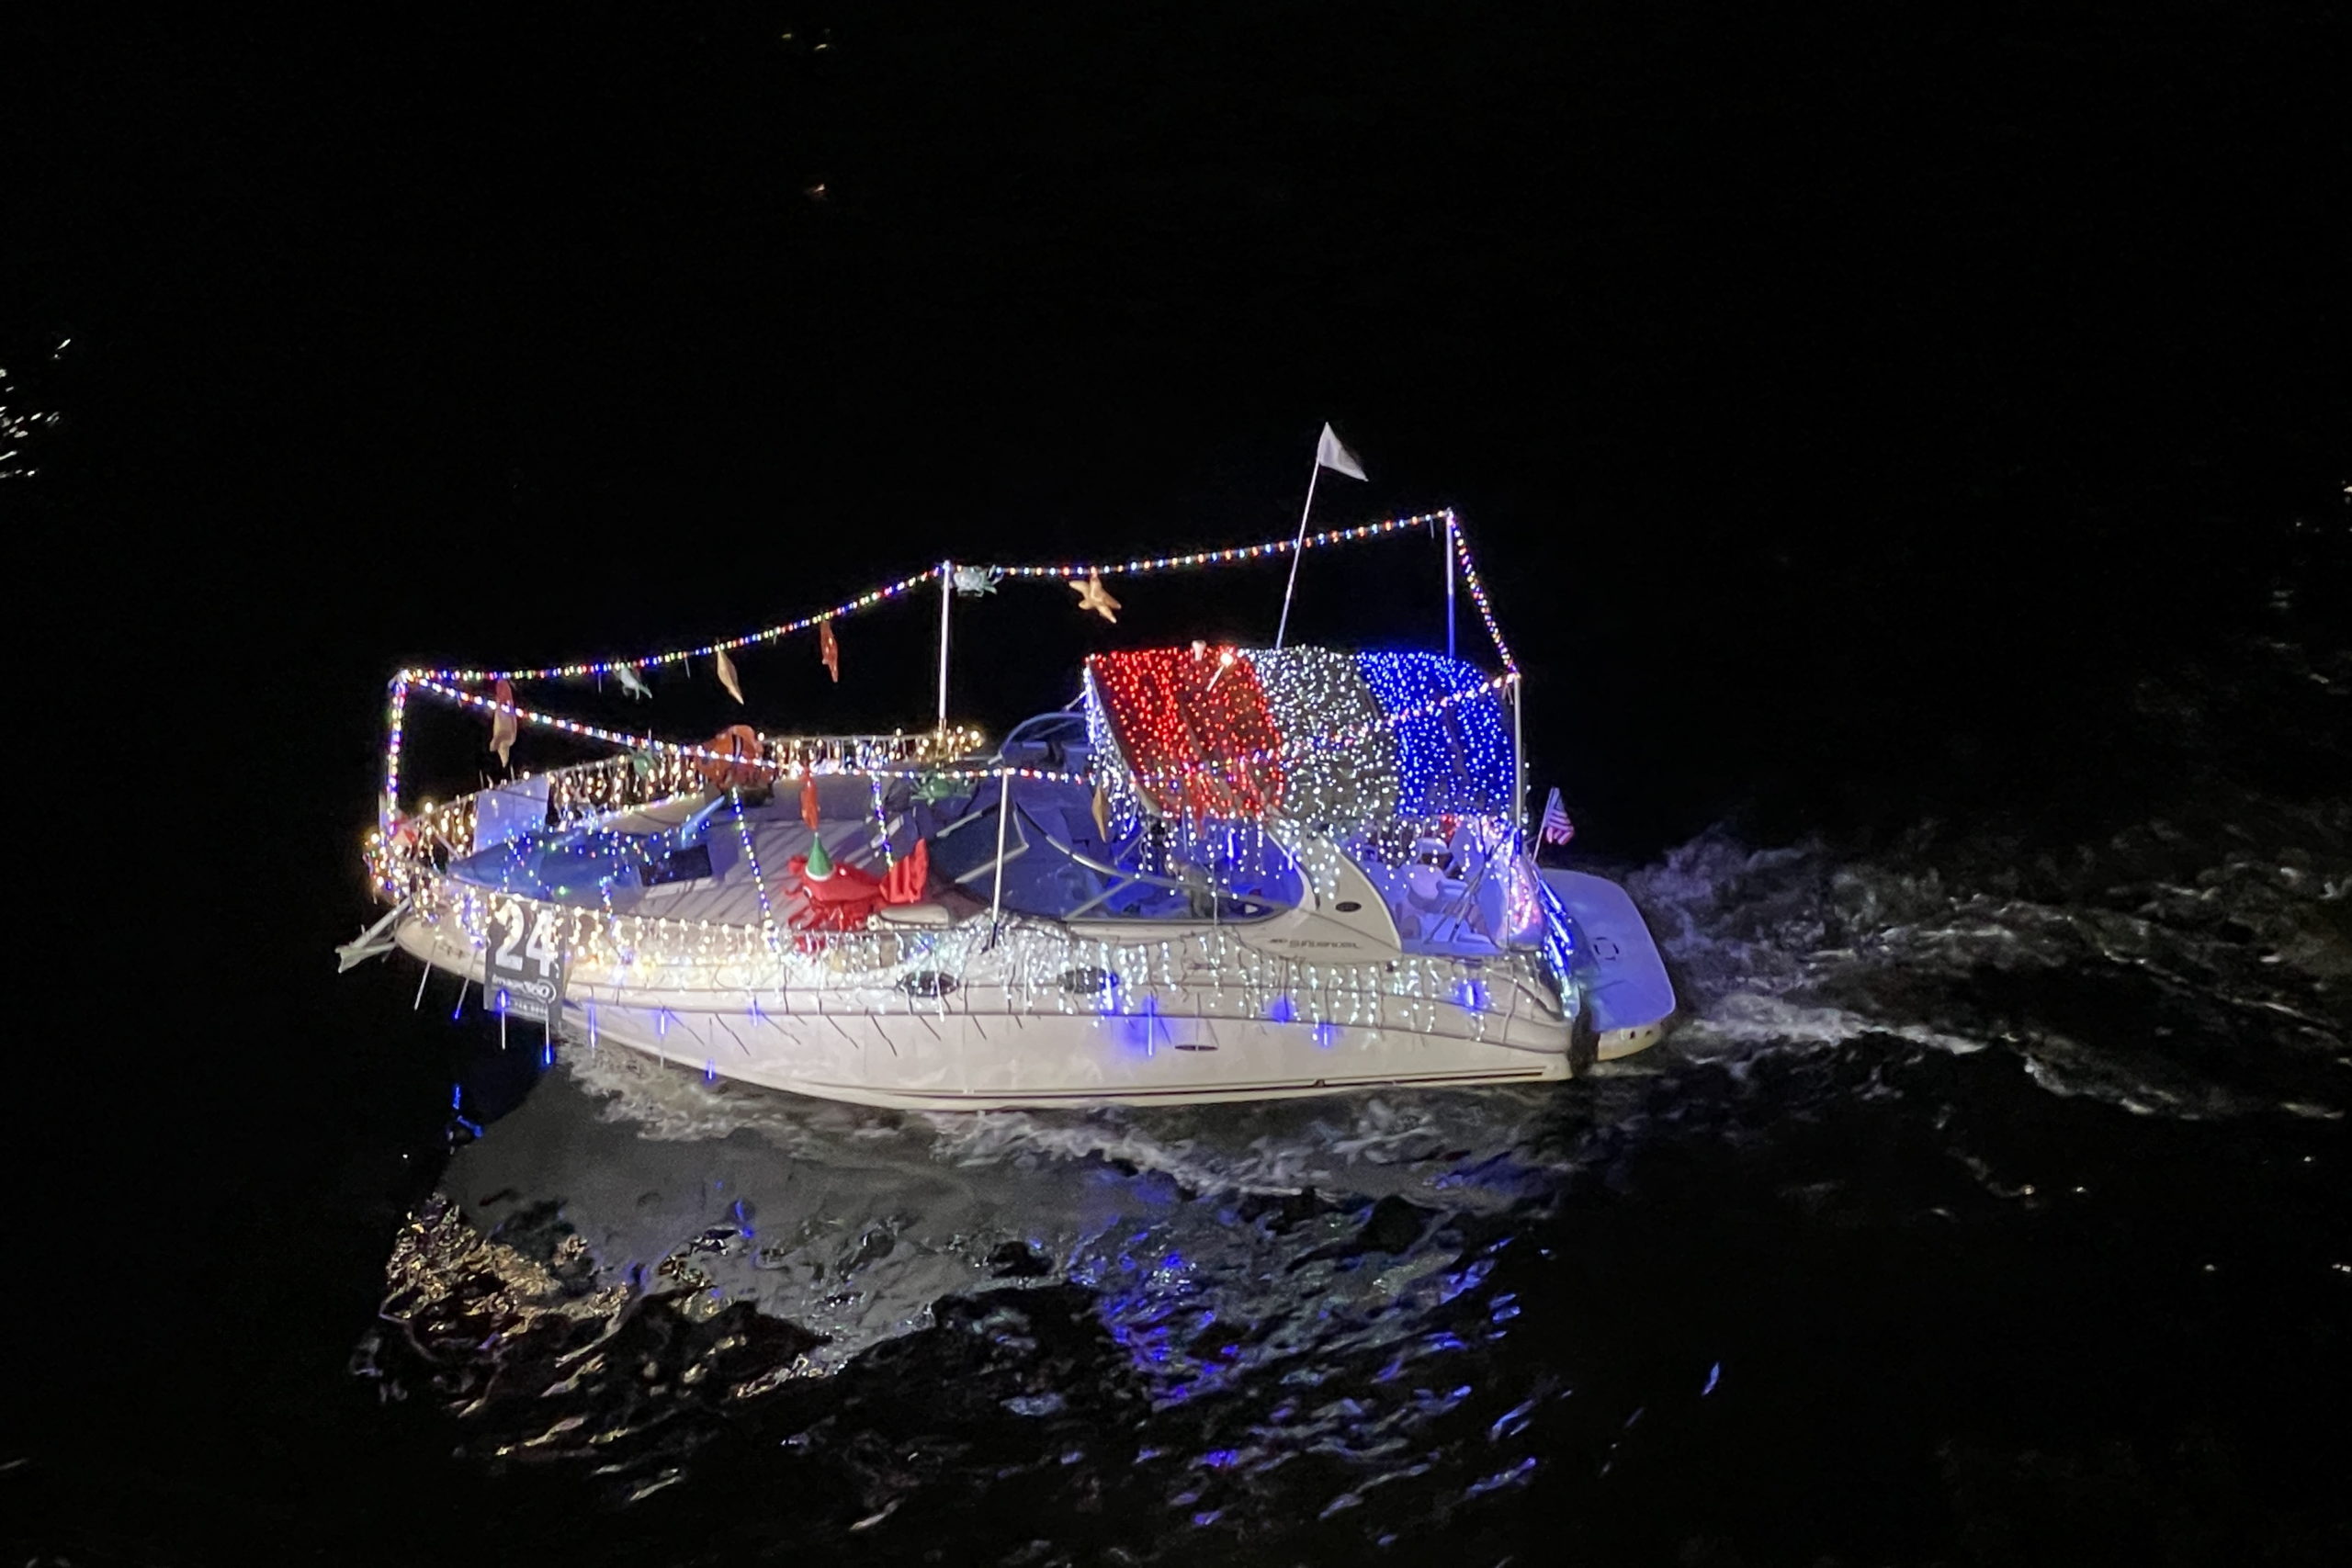 Felicity, boat number 24 in the 2022 Winterfest Boat Parade